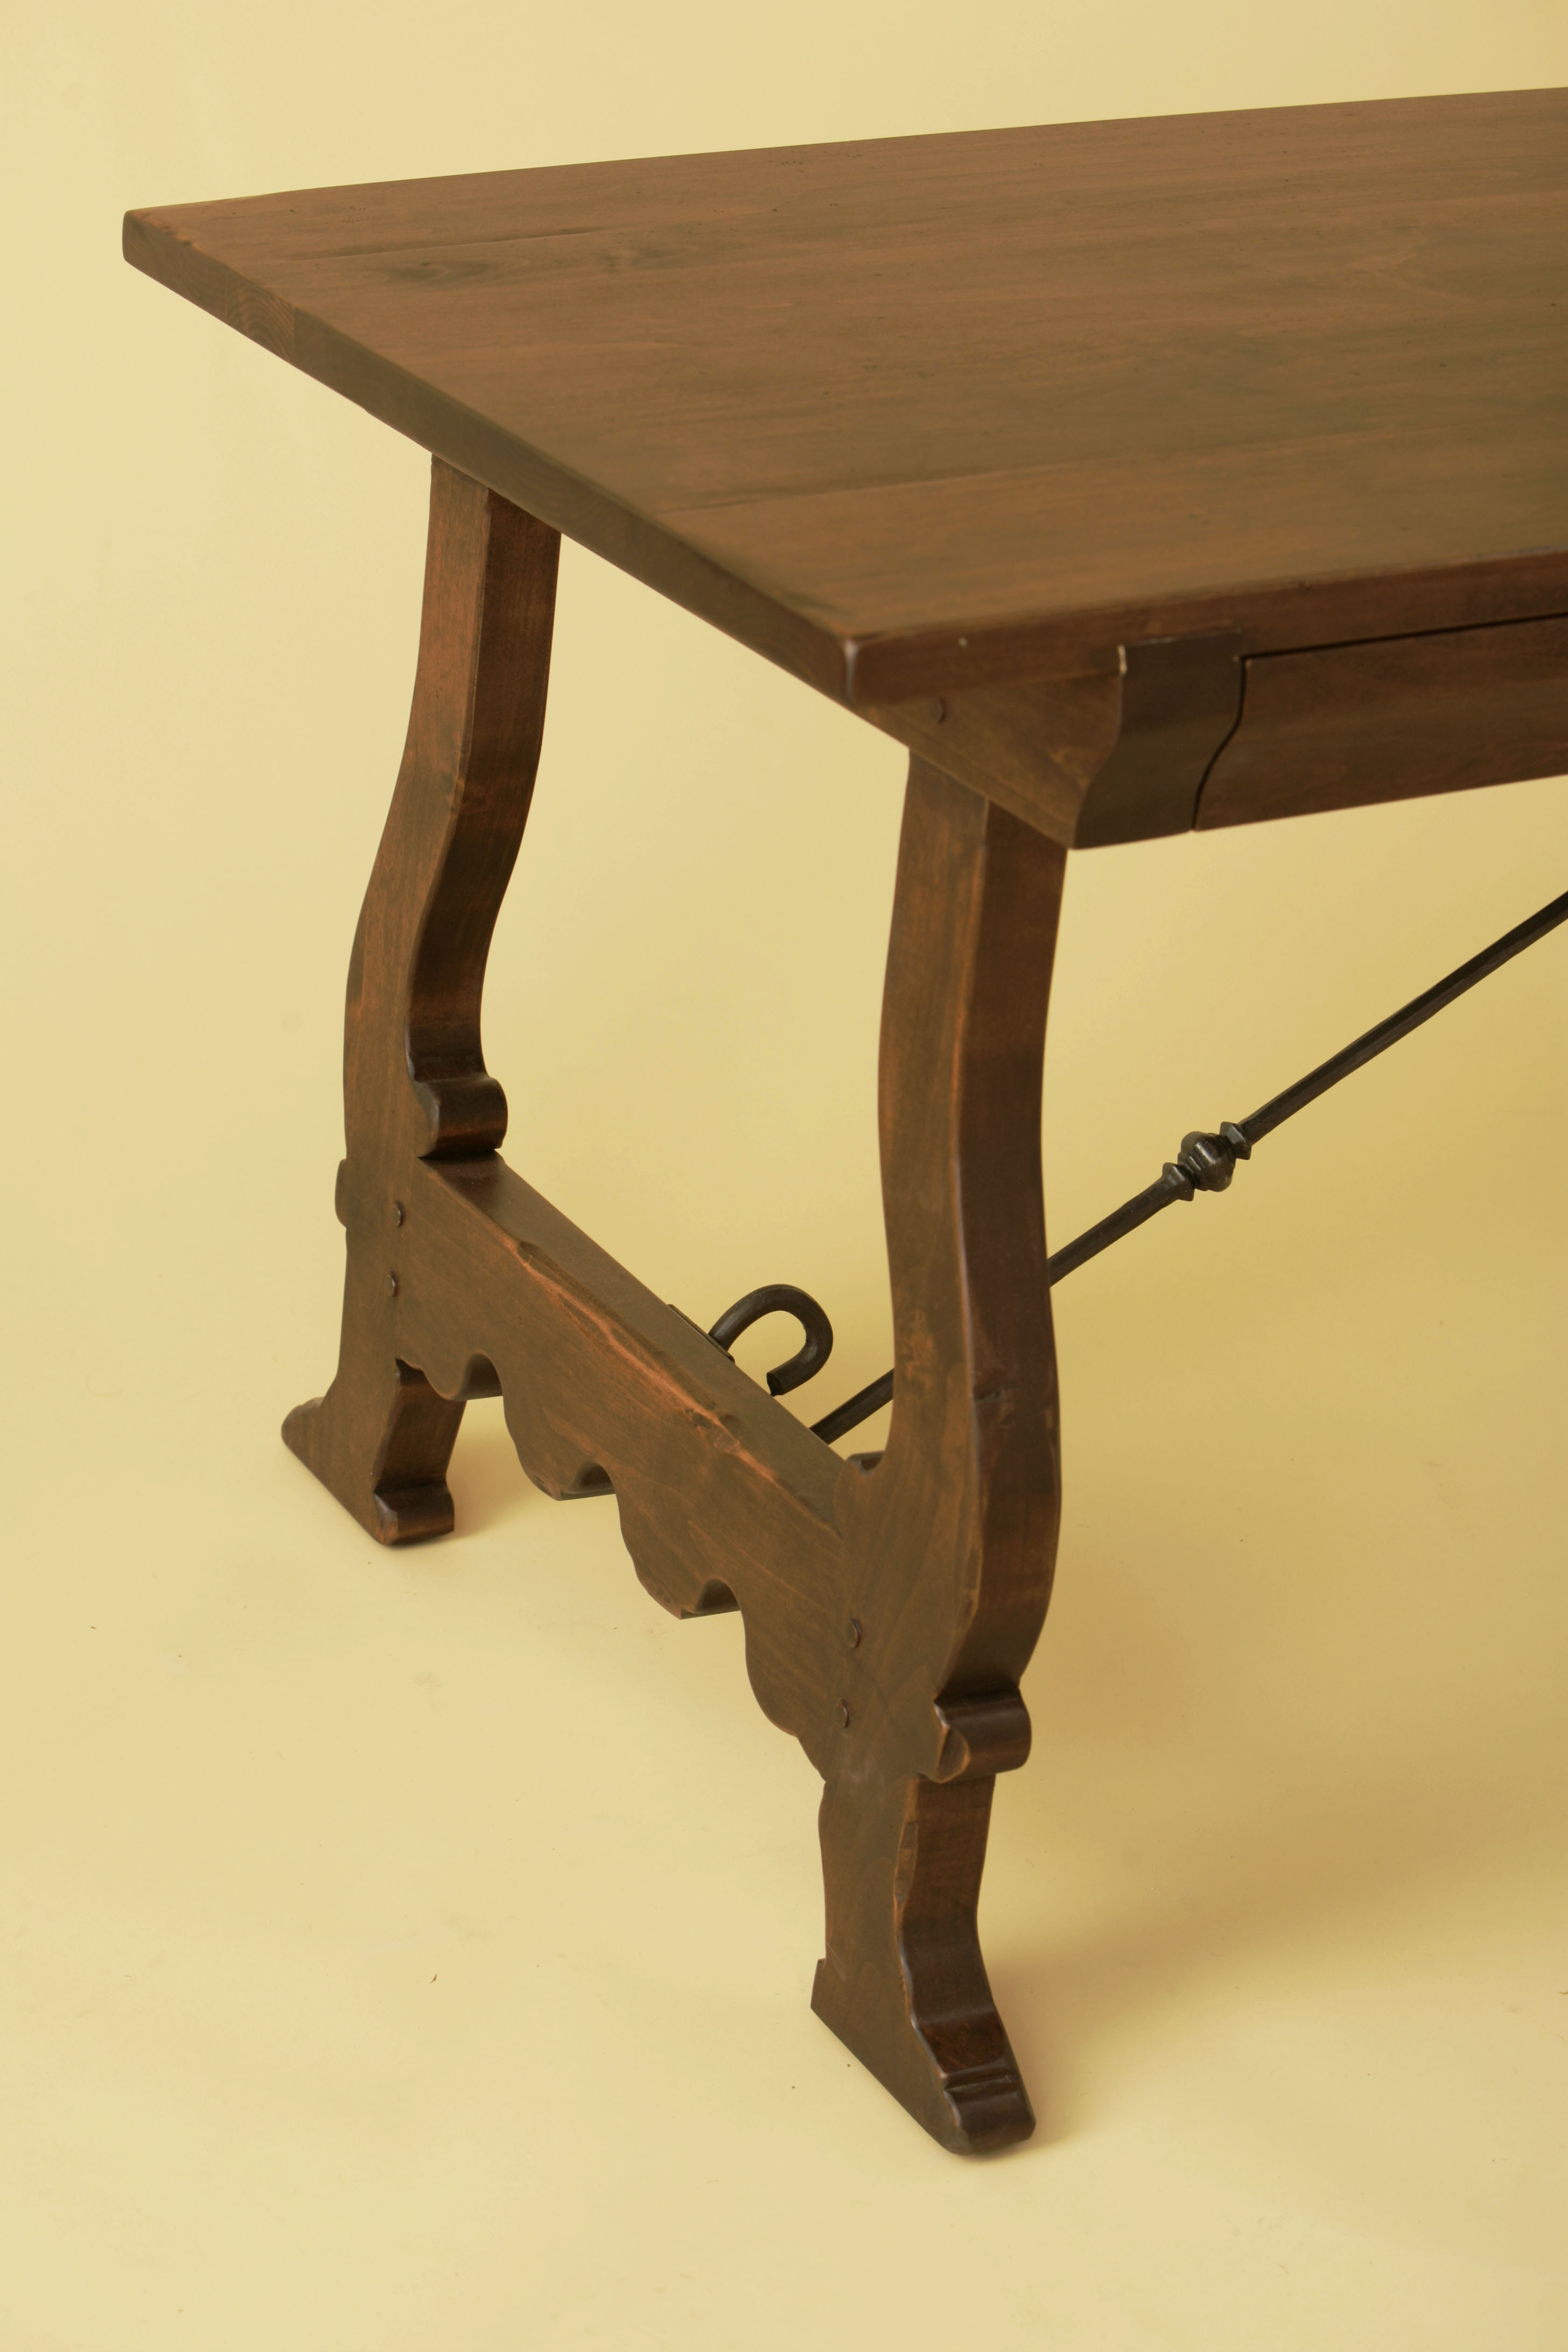 French Writing Desk